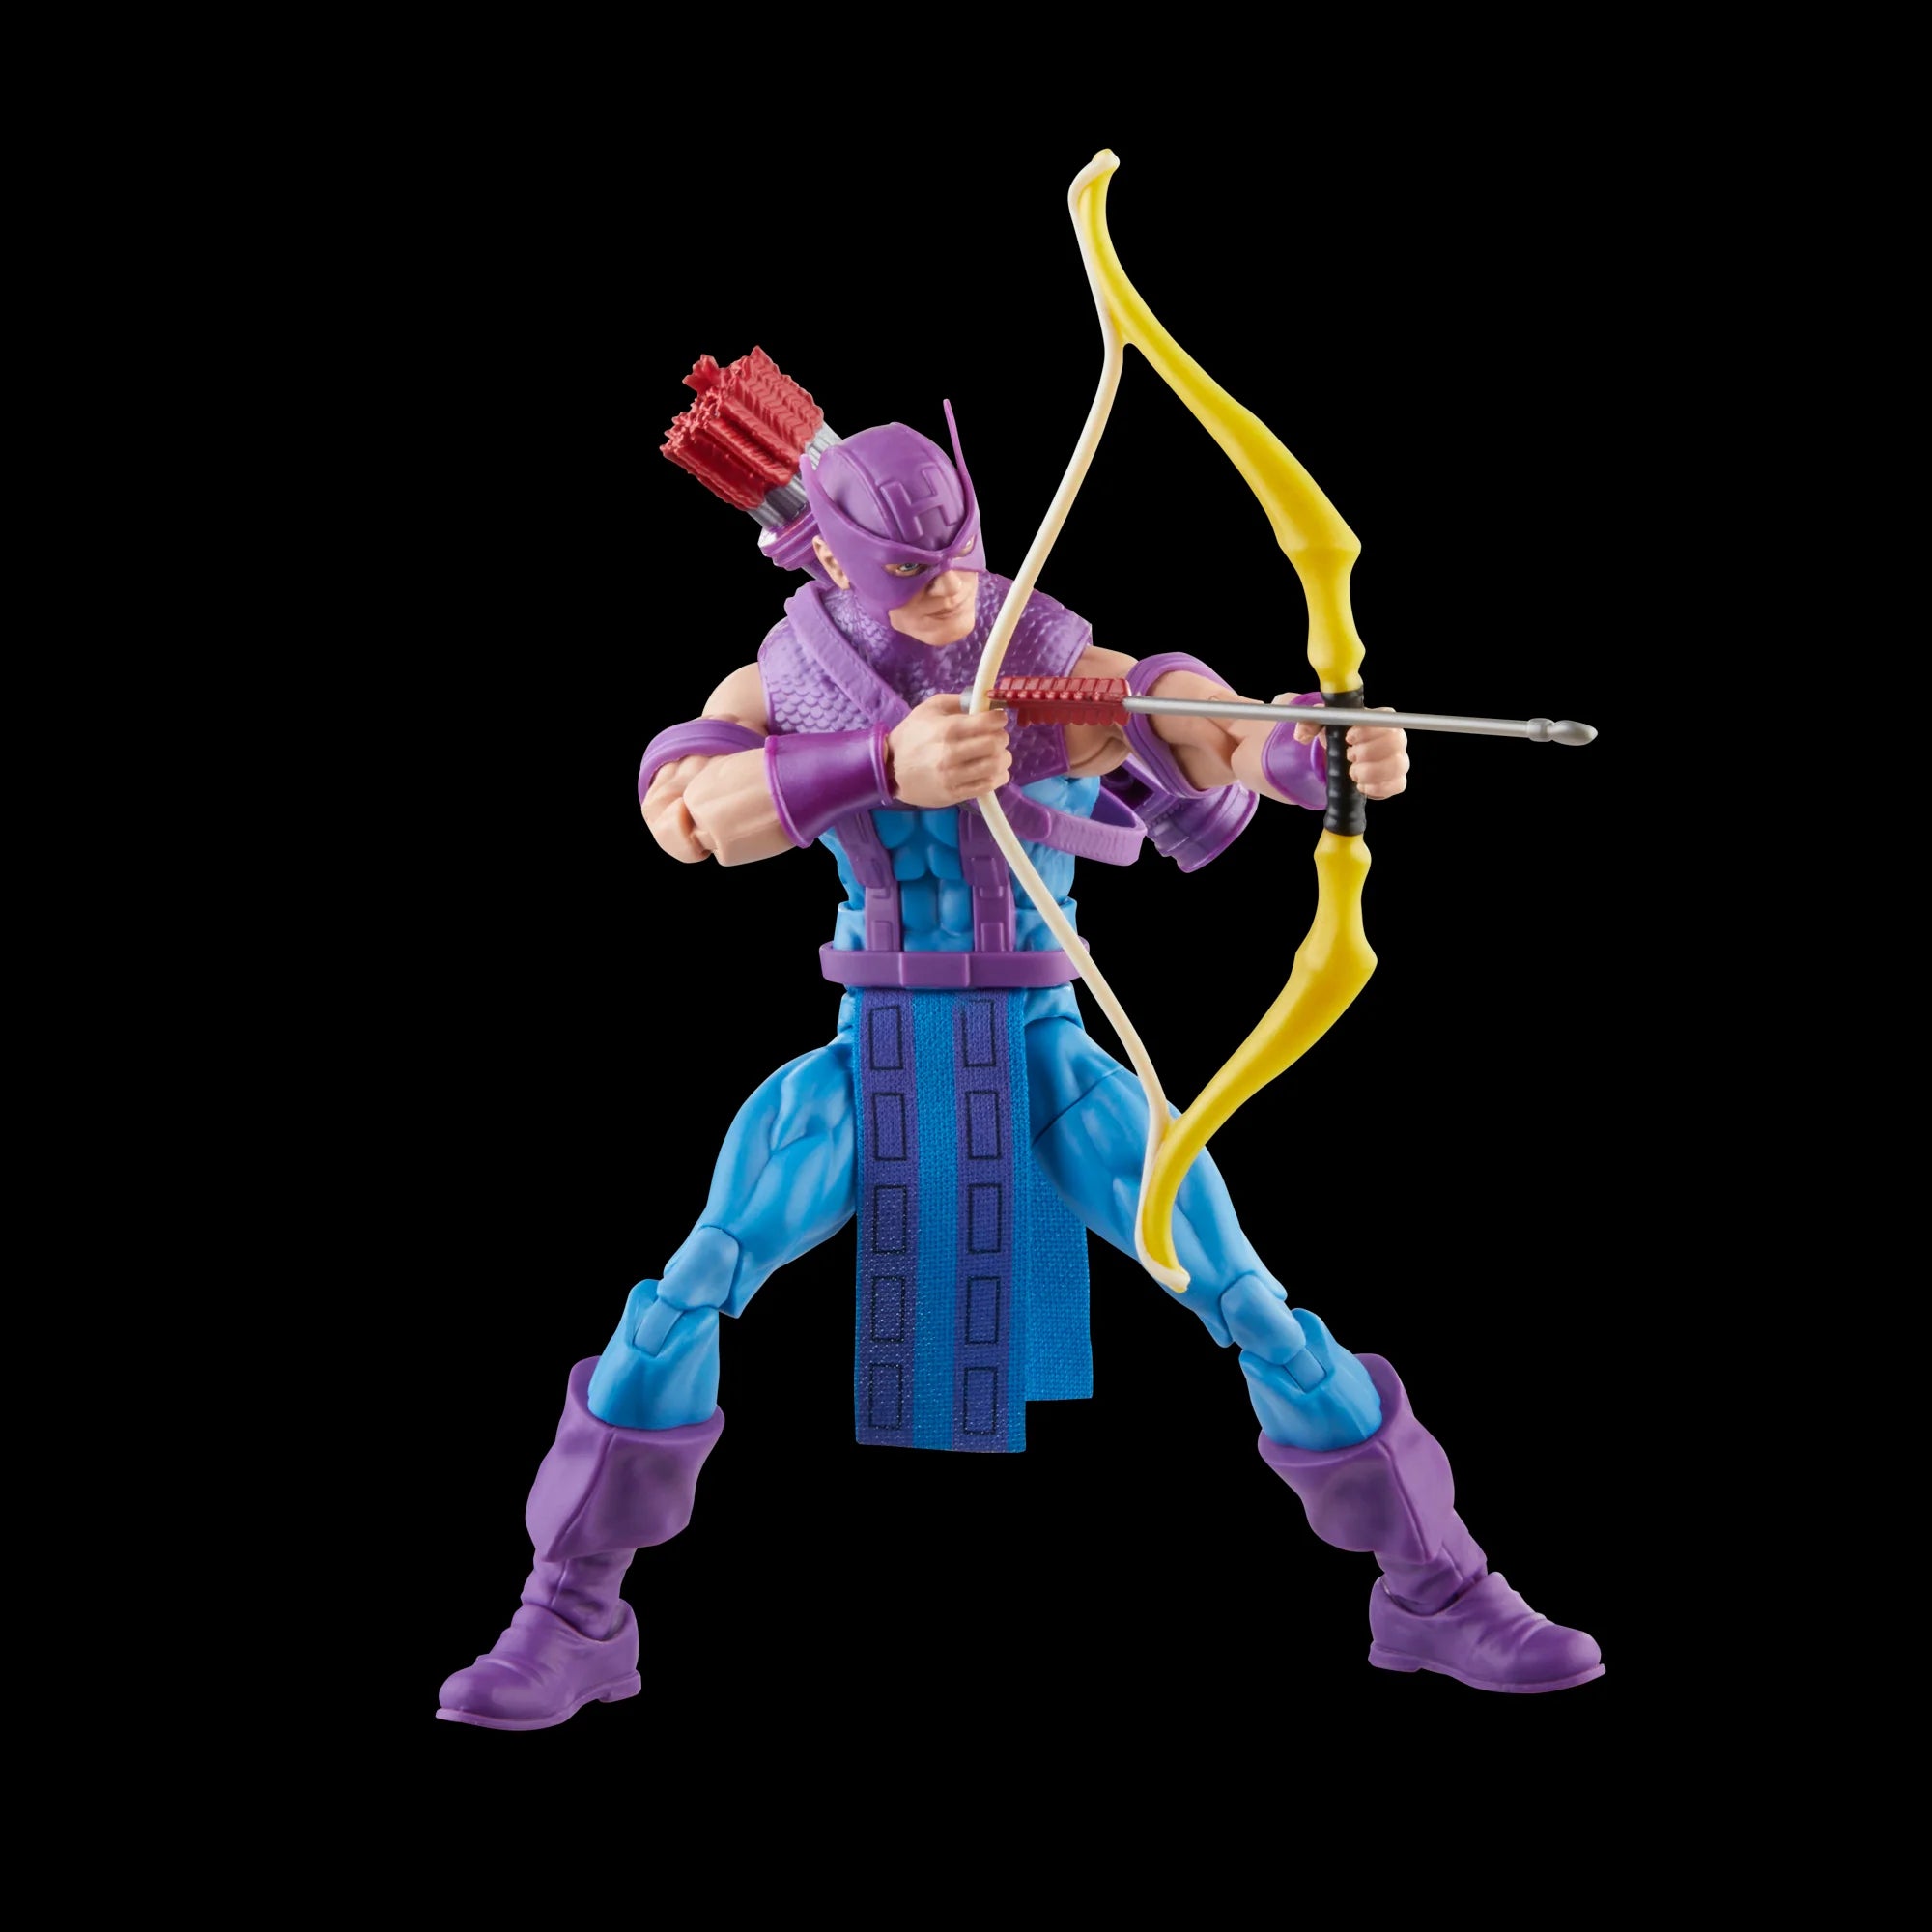 Hasbro - Marvel Legends - Avengers 60th Anniversary - Hawkeye with Sky-Cycle - Marvelous Toys